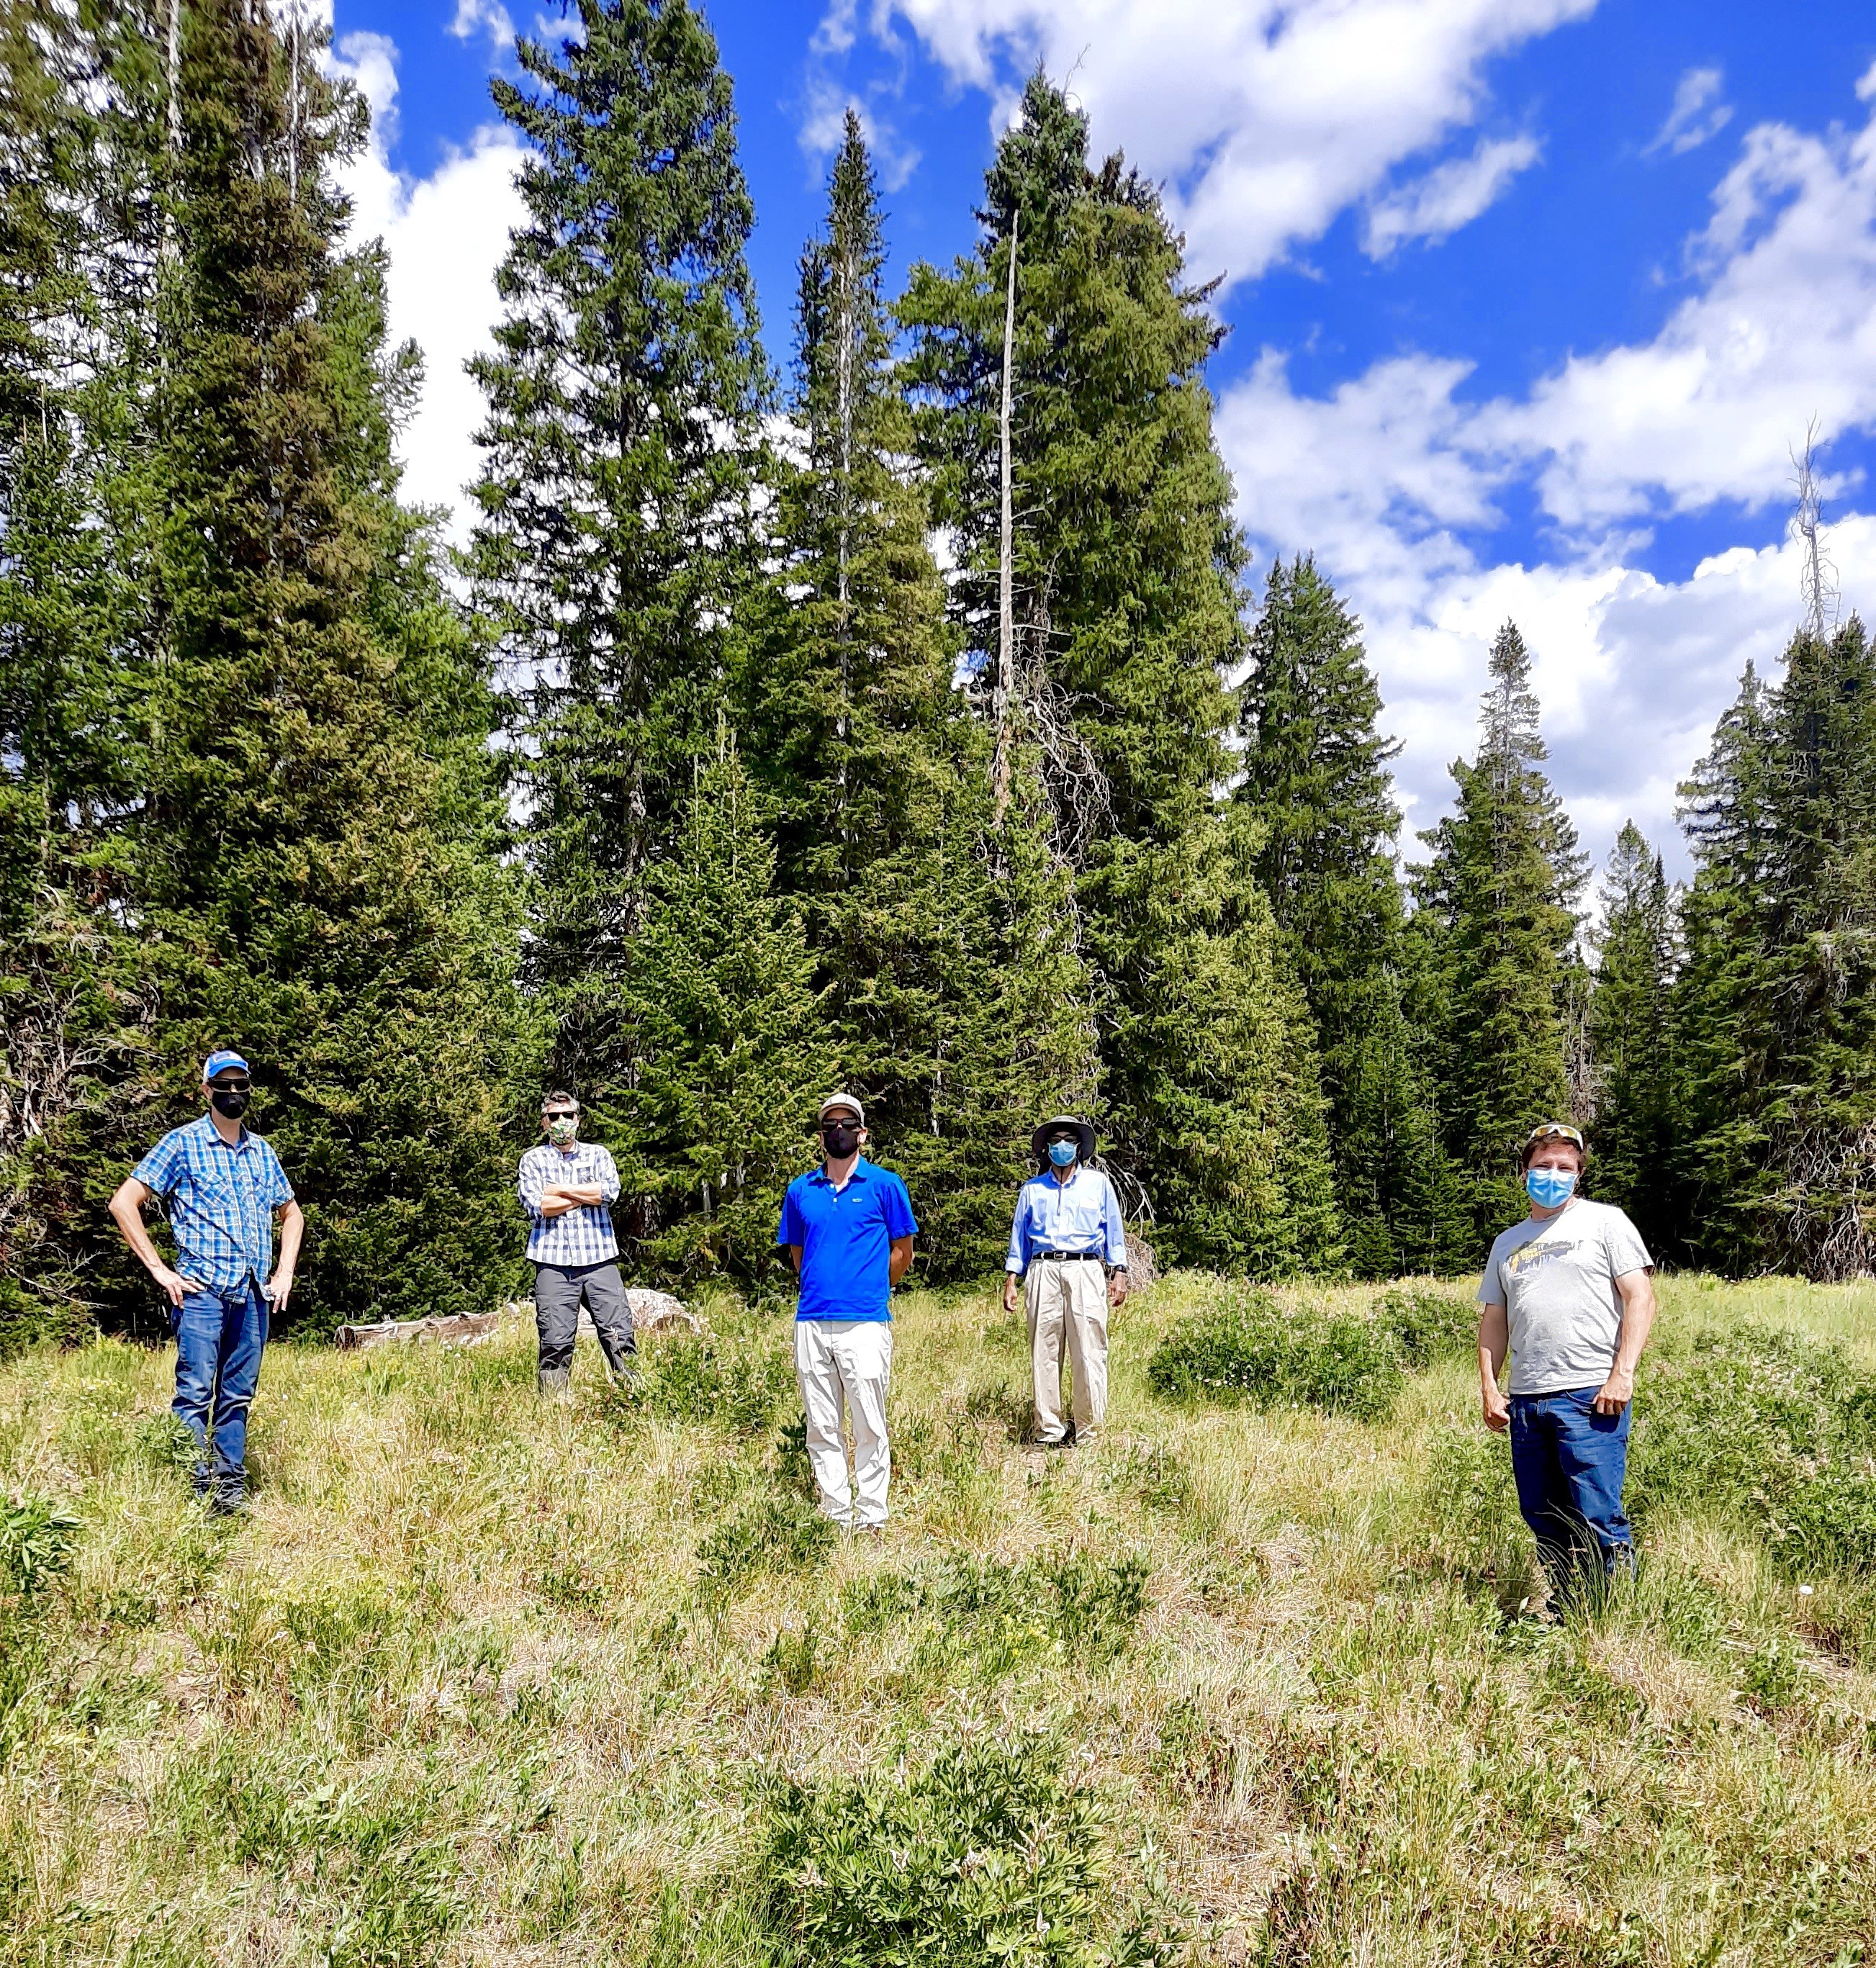 Key members of the SAIL team survey a radar site at Crested Butte Mountain Resort in Colorado